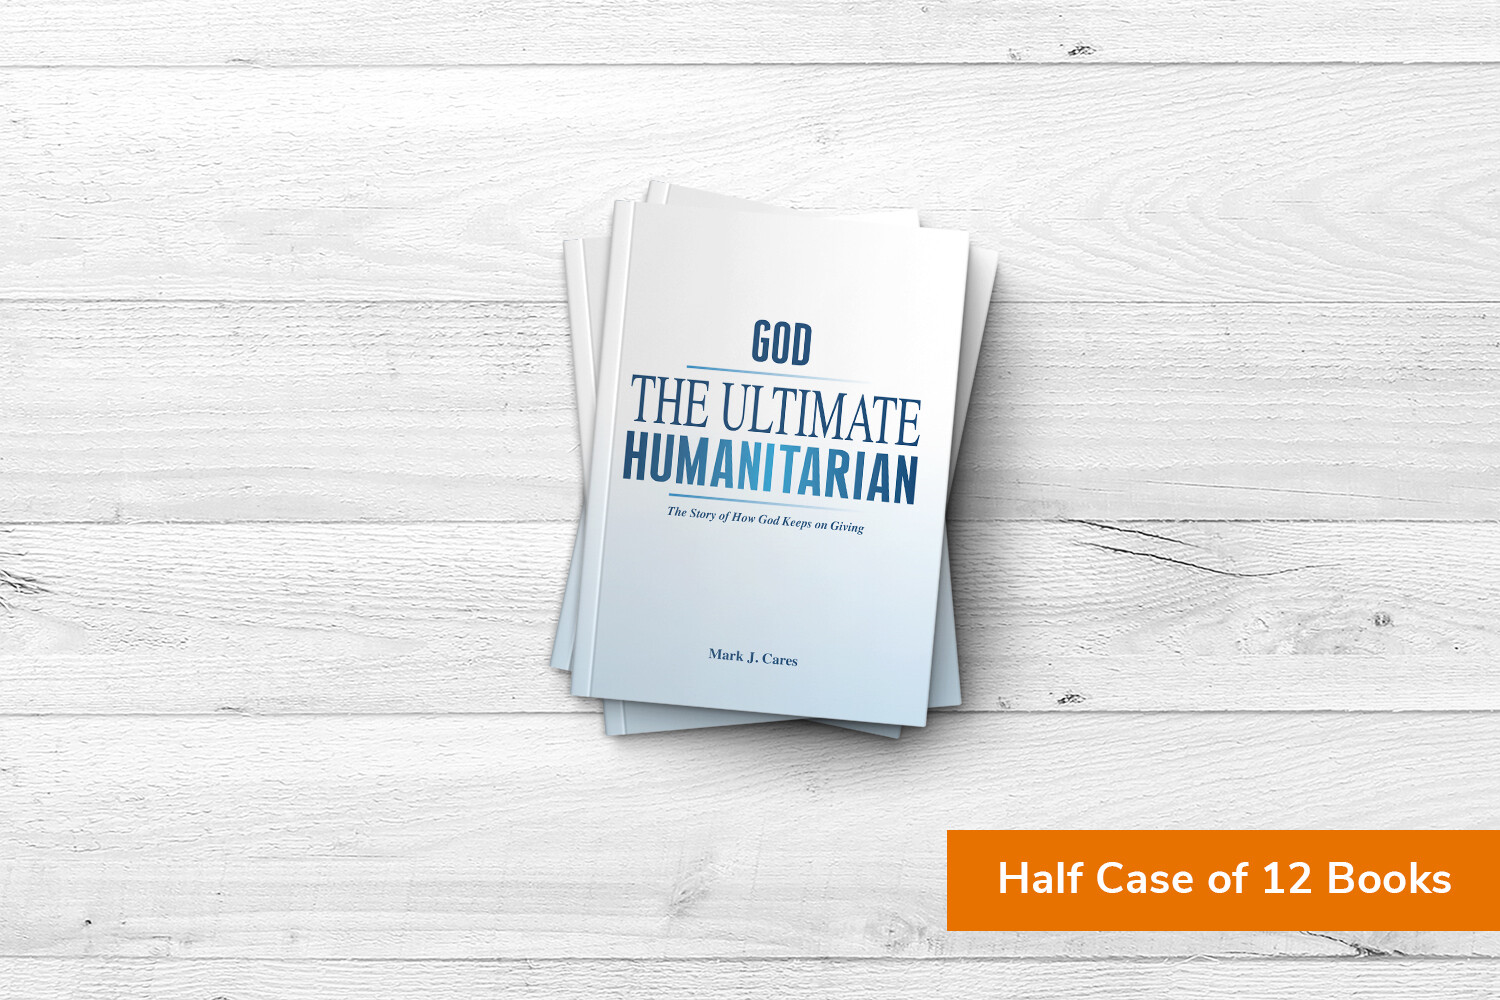 God - The Ultimate Humanitarian by the half case